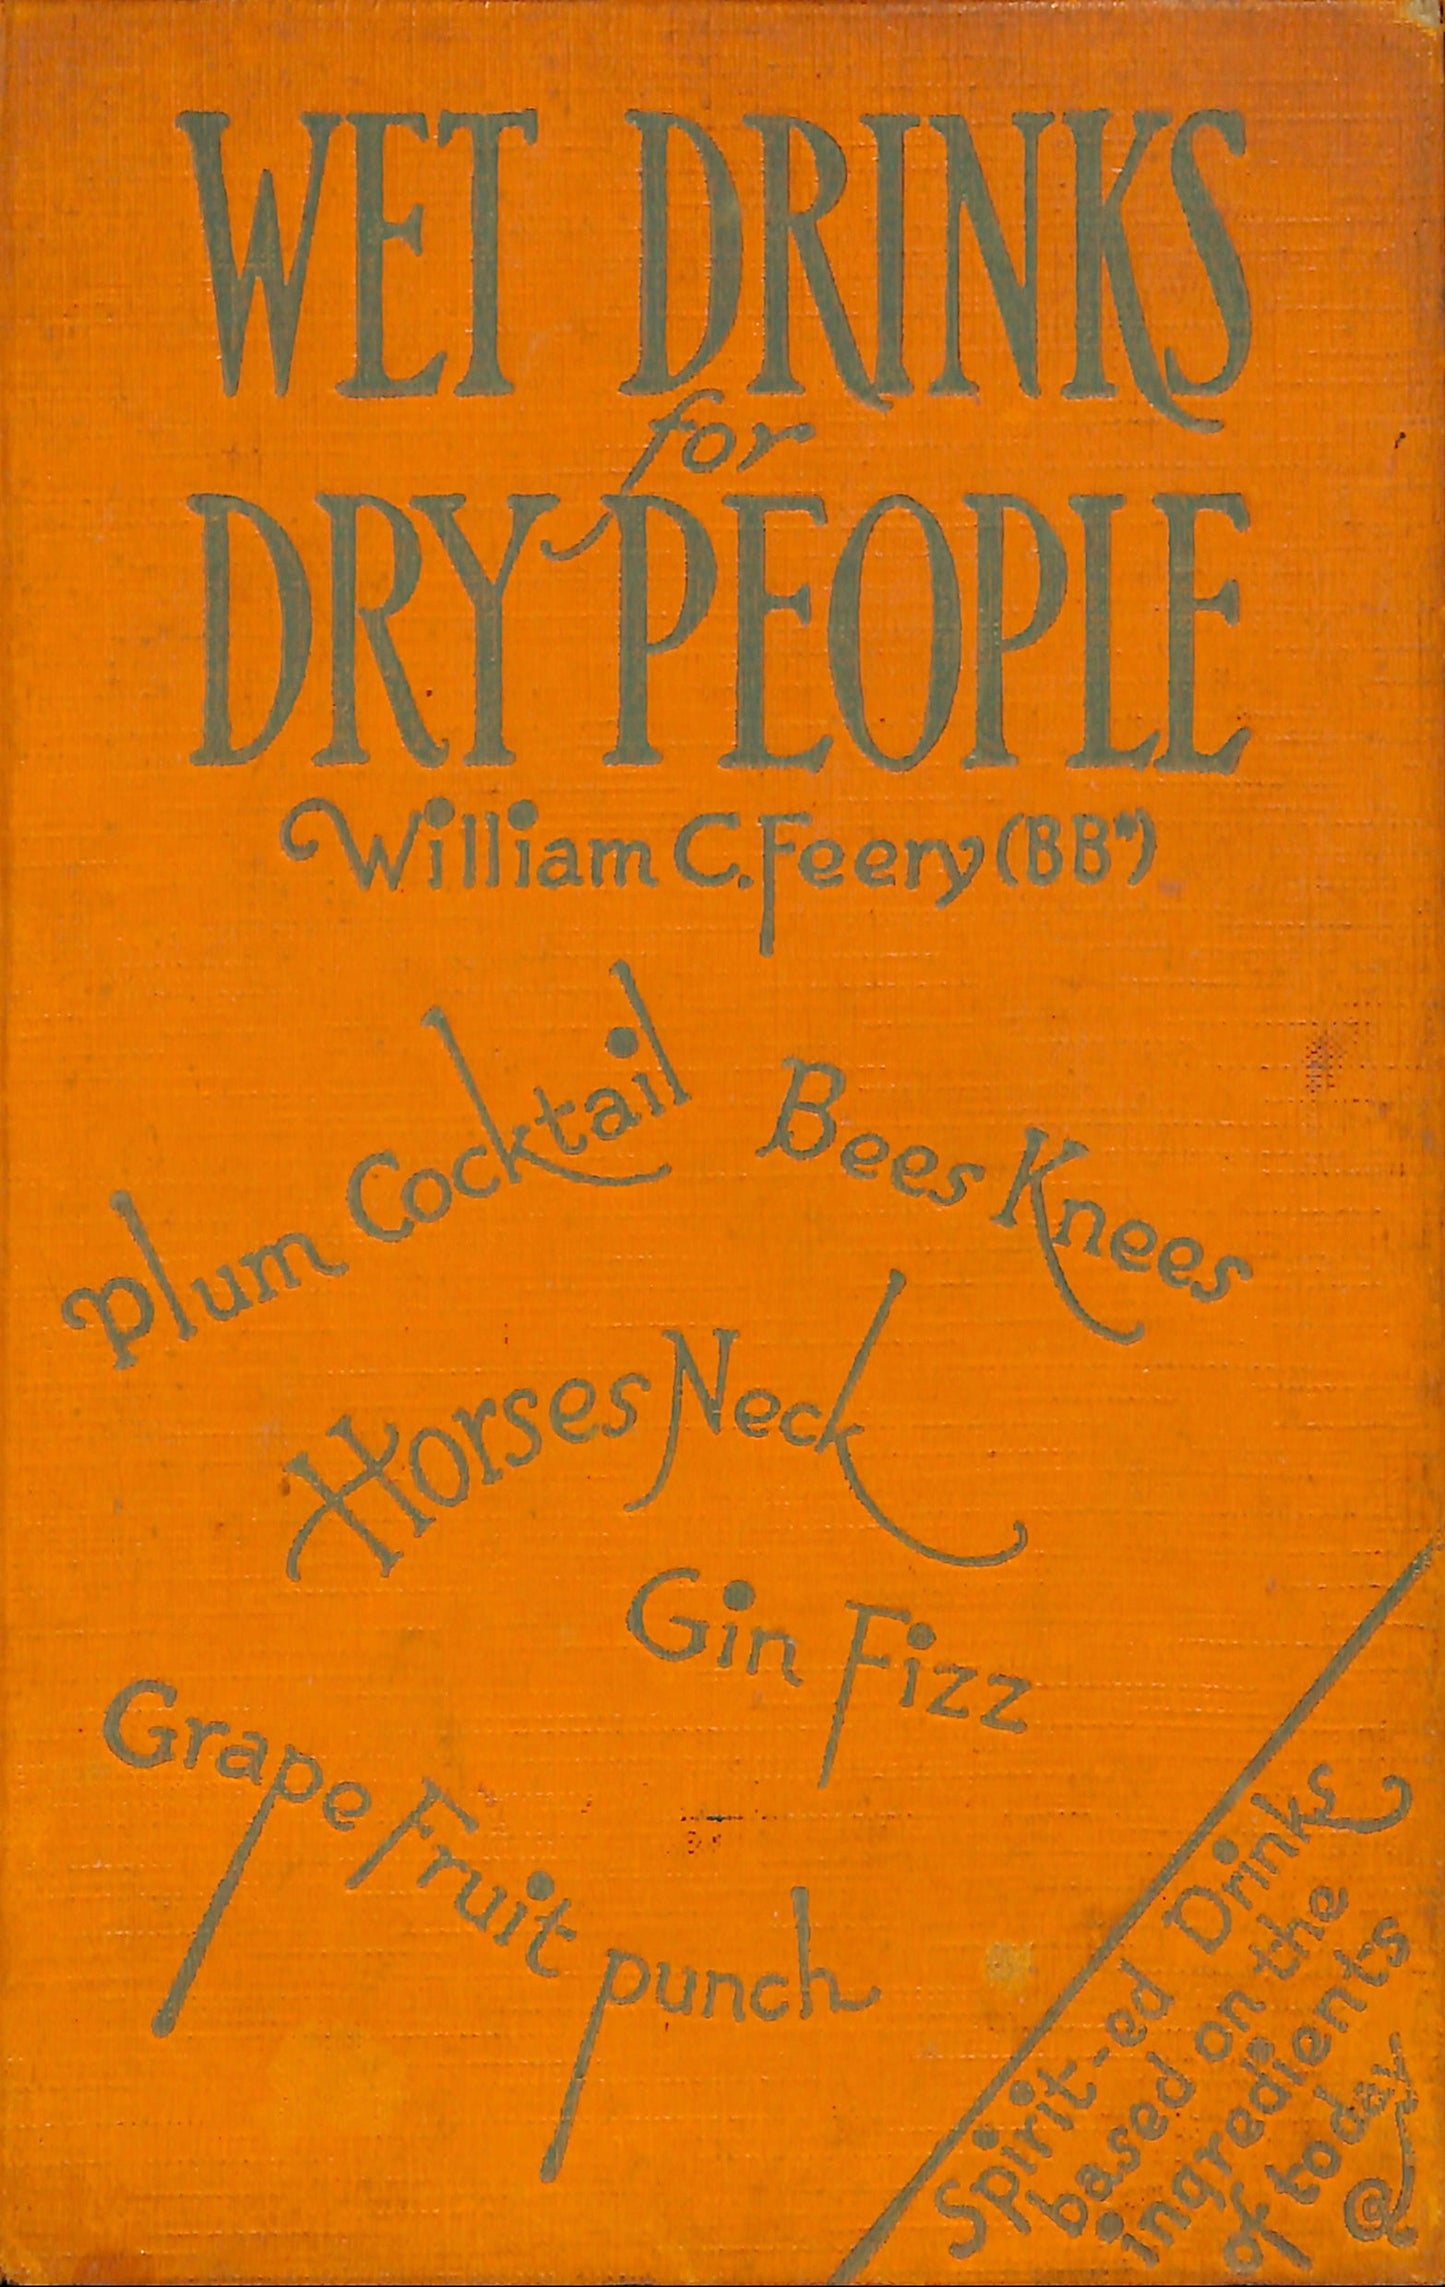 Wet Drinks for Dry People Cocktail book cover (1930s) | Vintage cocktail posters Posters, Prints, & Visual Artwork The Trumpet Shop   